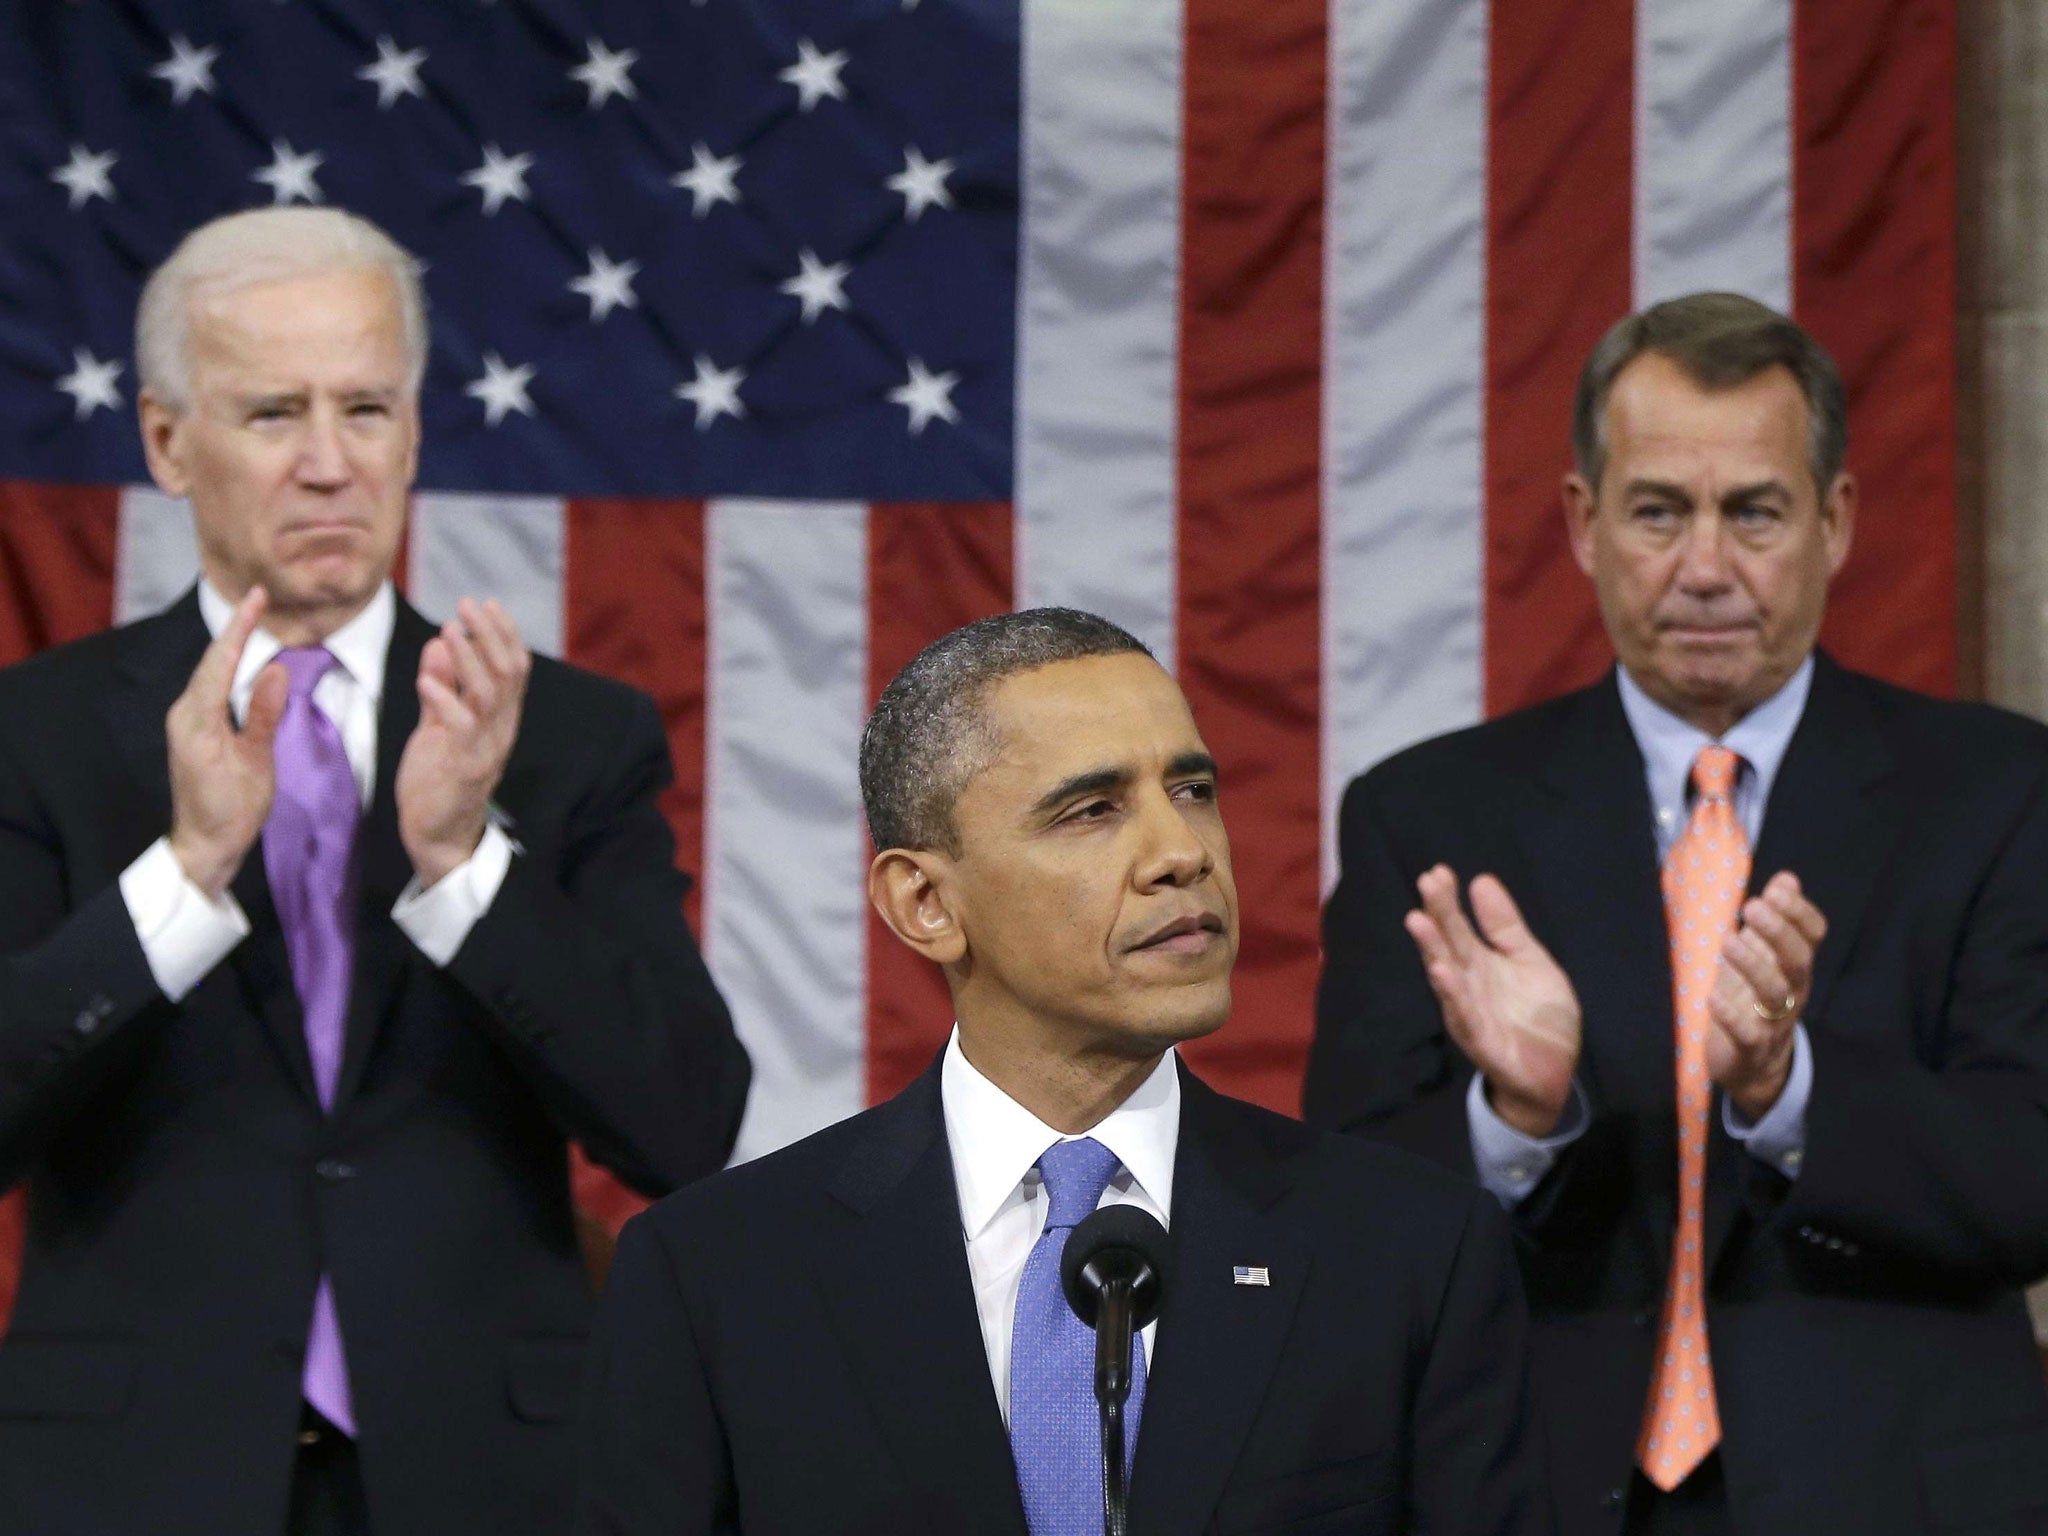 US House Speaker John Boehner (right) and Vice President Joe Biden (left) stand to applaud as President Barack Obama delivers his State of the Union speech